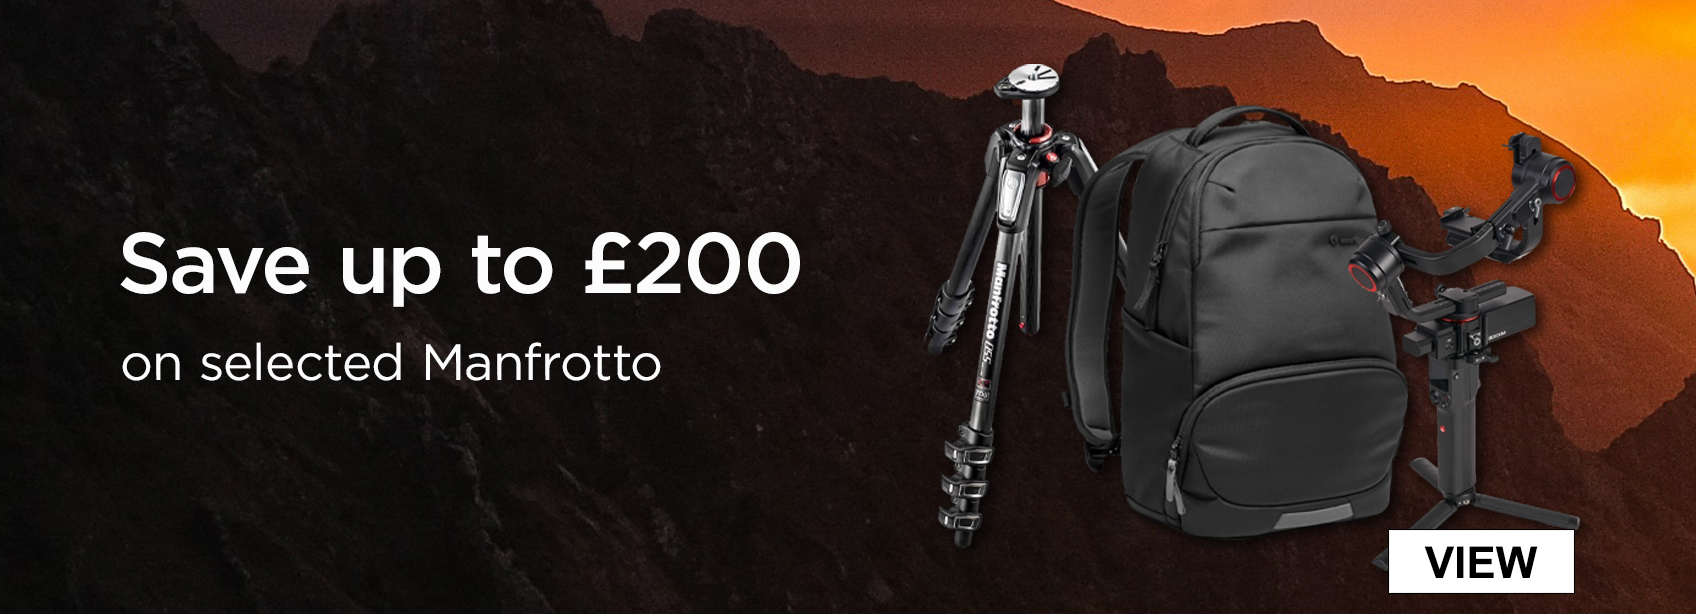 Save up to £200 on selected Manfrotto